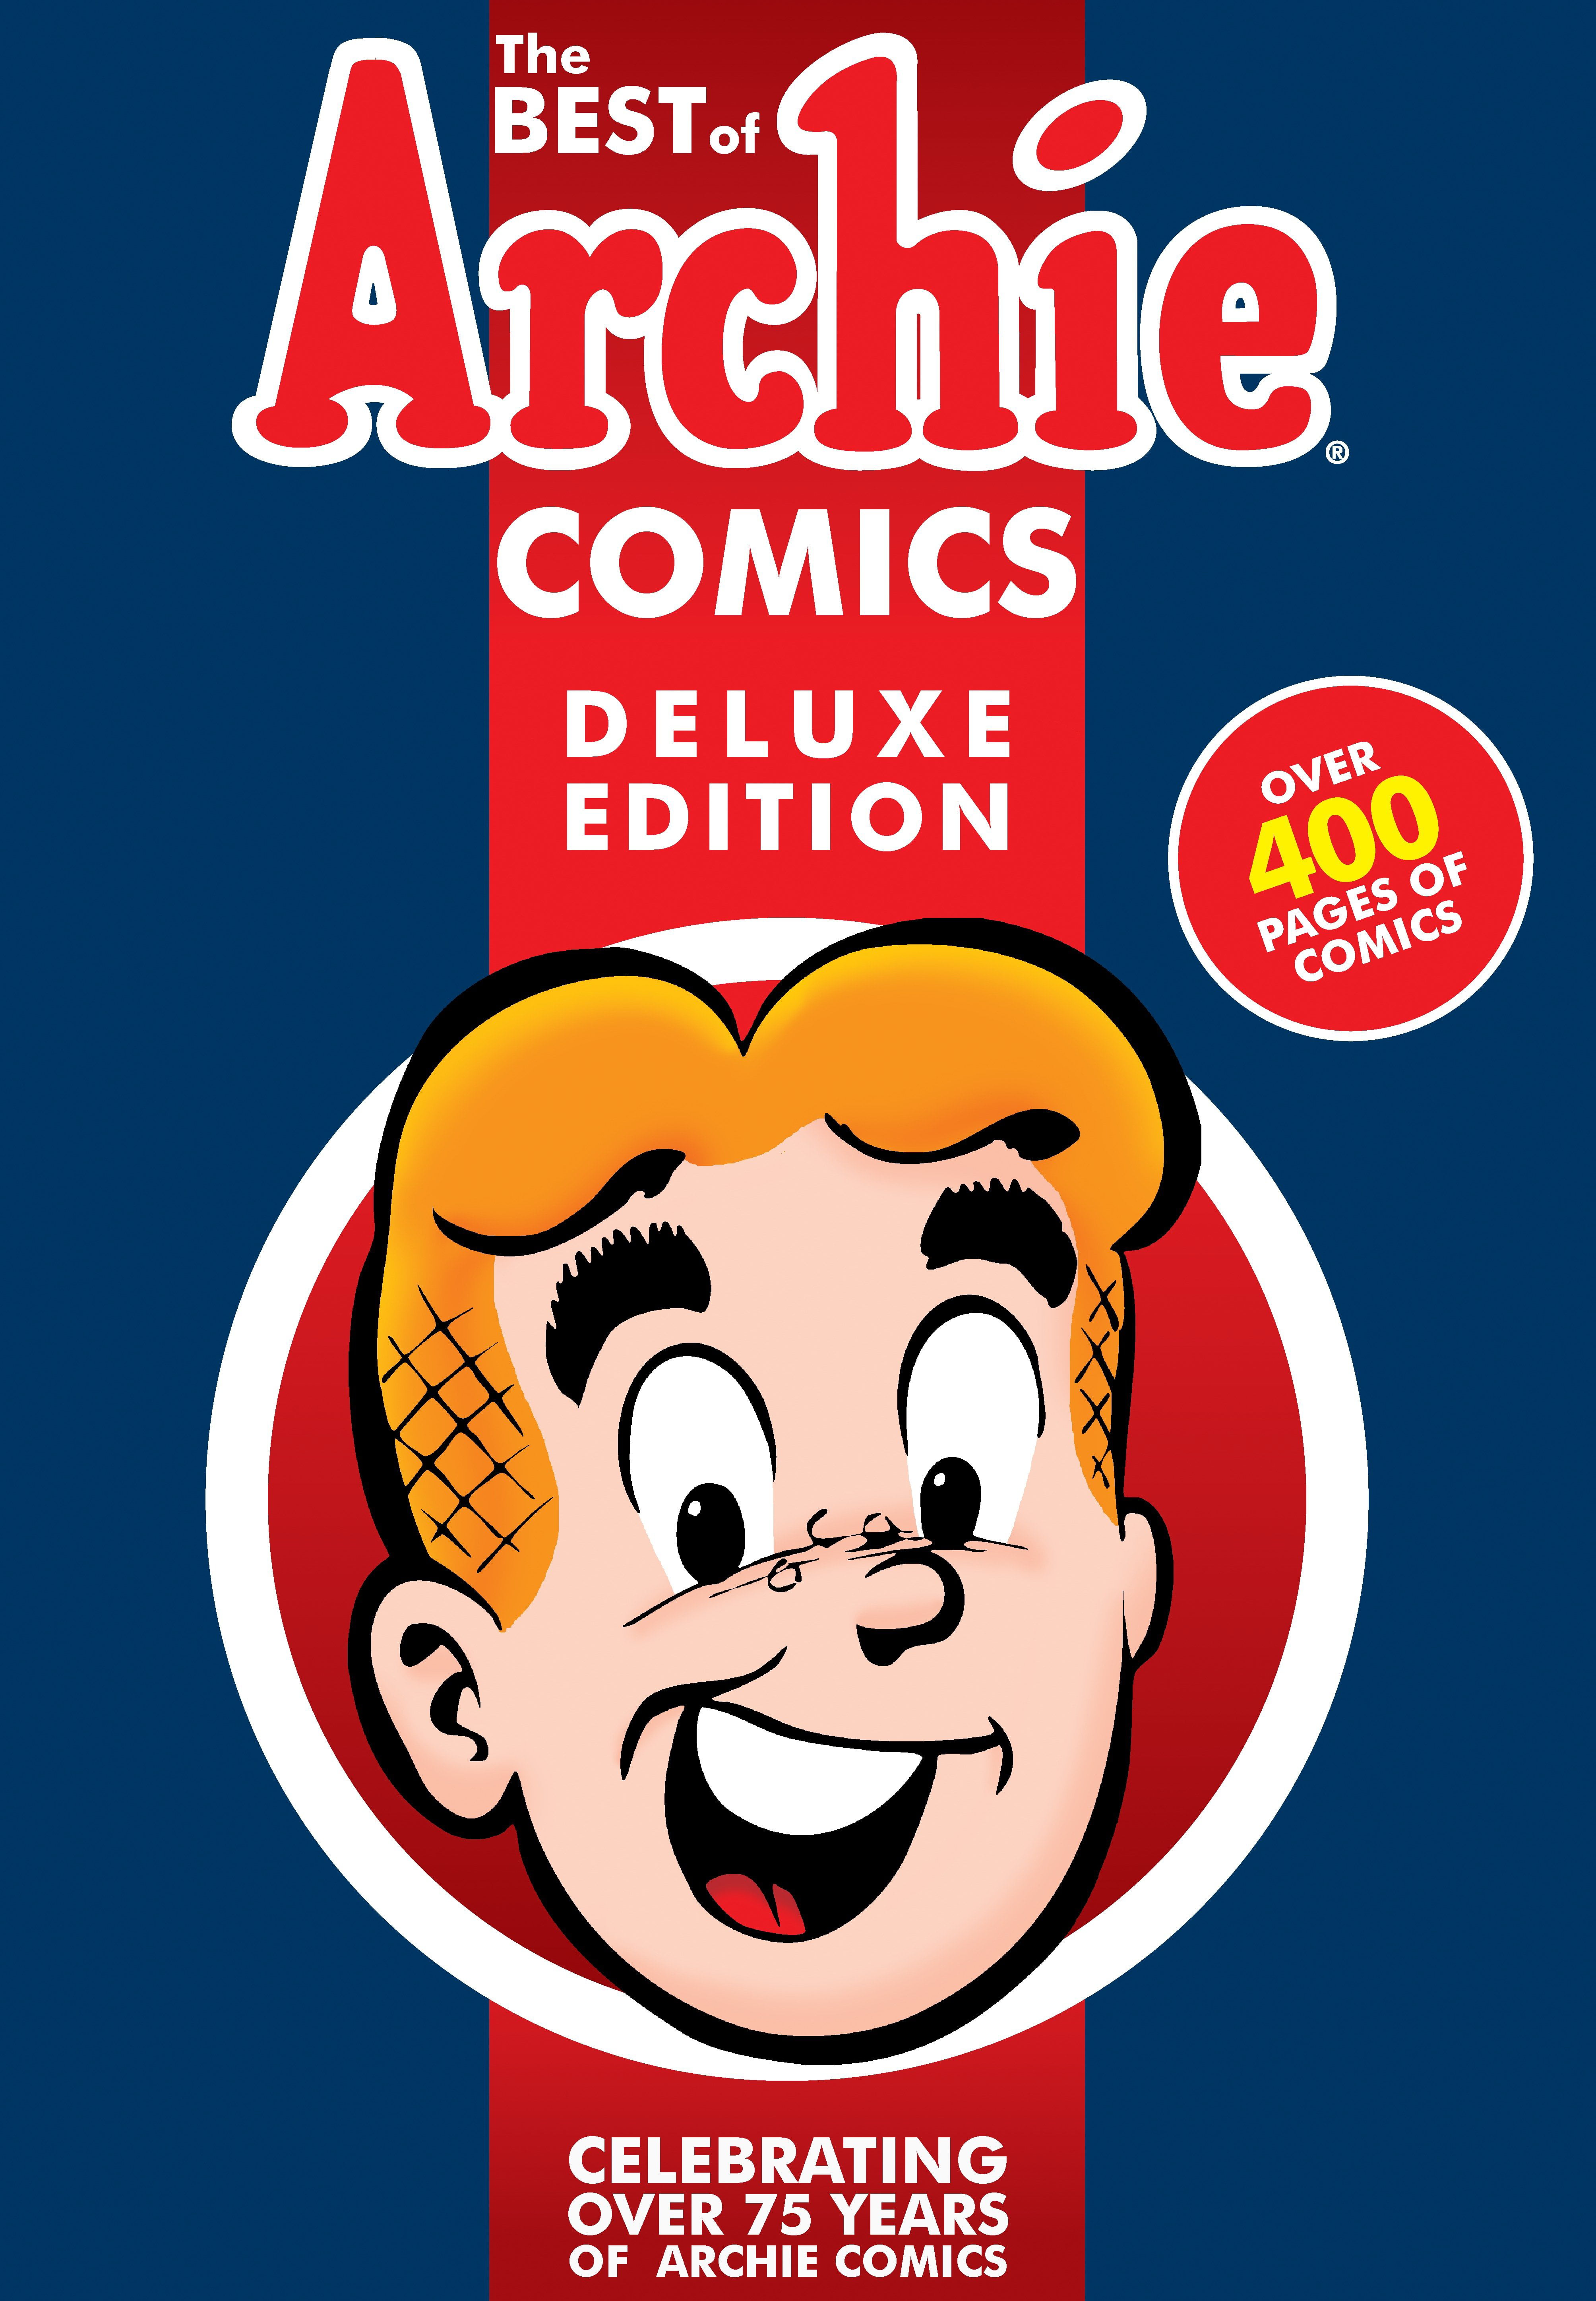 biography of archie in best friends in the world